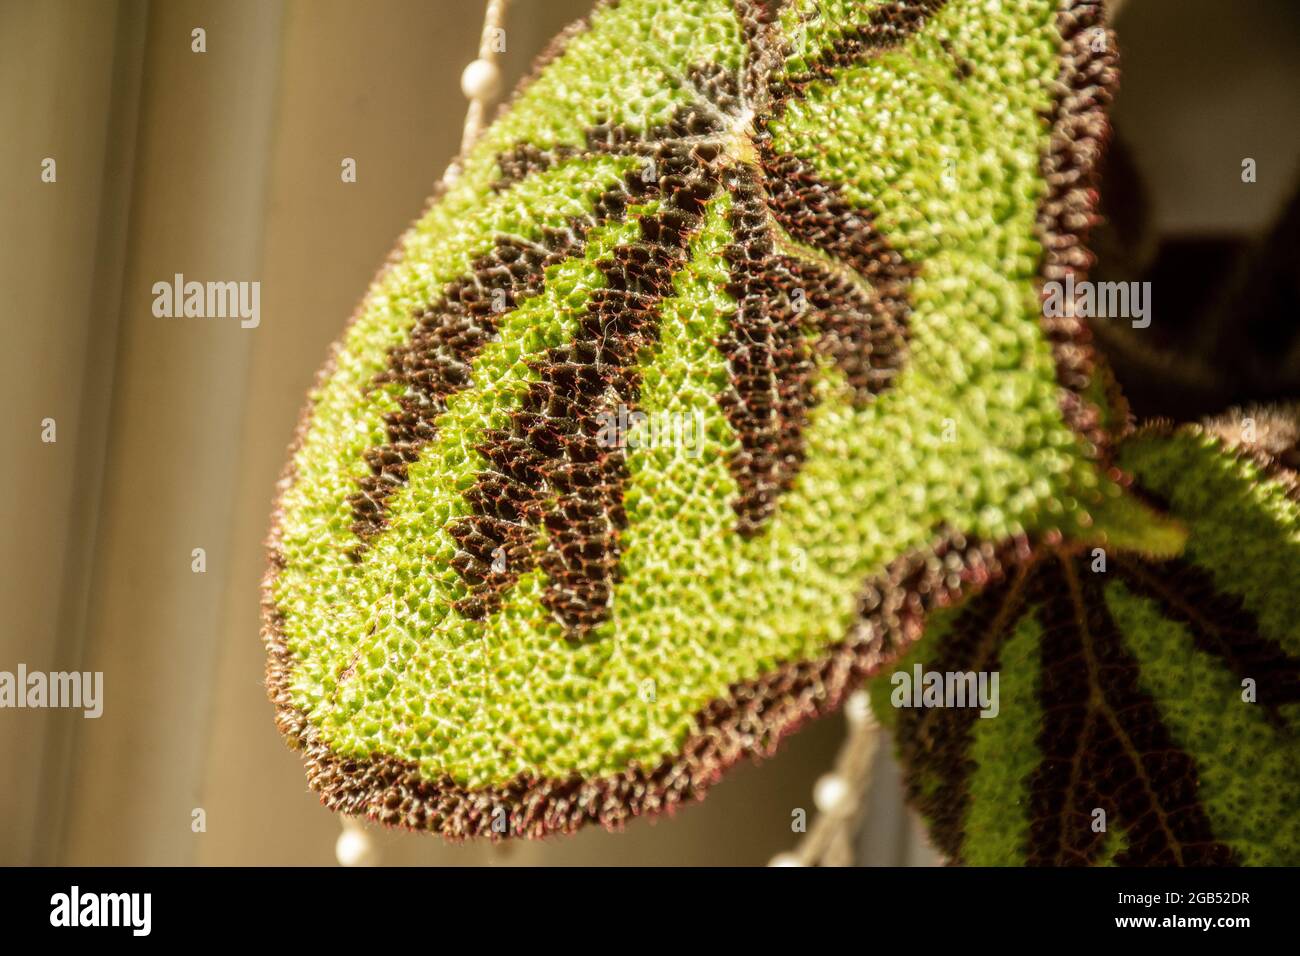 The large brownish red and green leaf of an Iron Cross Begonia indoors as part of a home garden Stock Photo